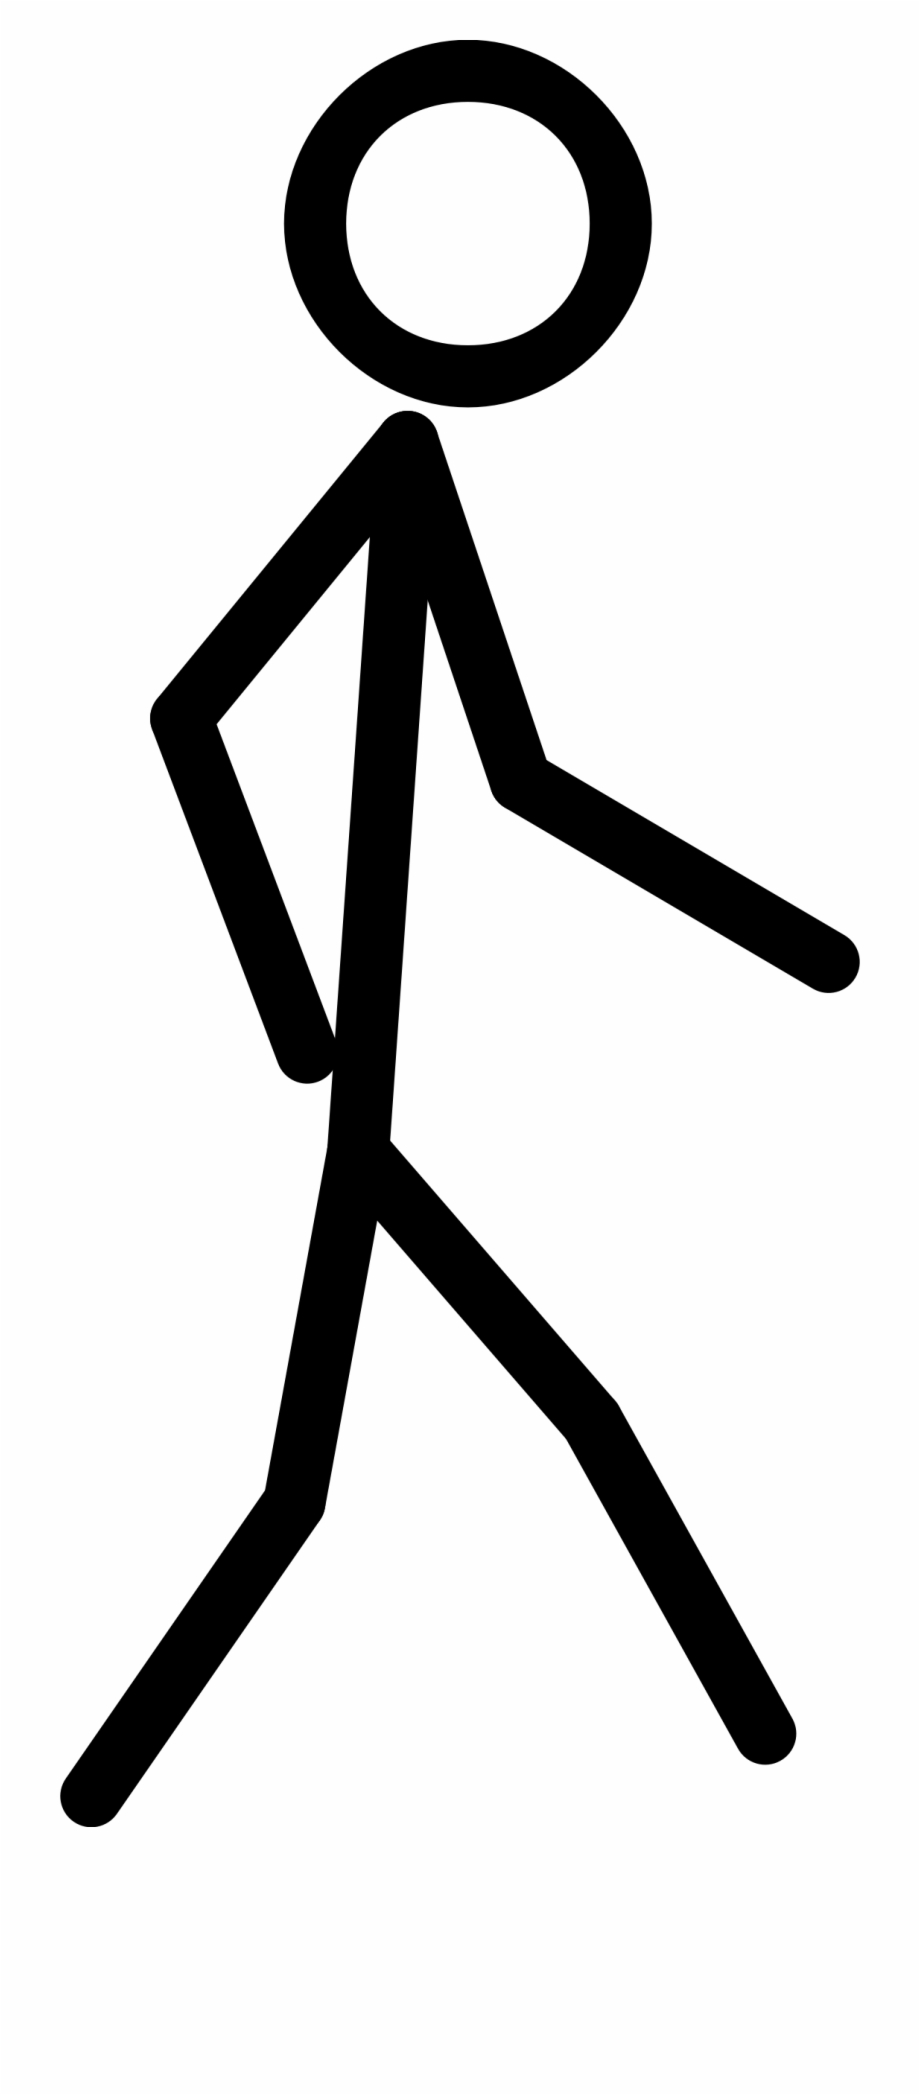 free-stick-figure-png-download-free-stick-figure-png-png-images-free